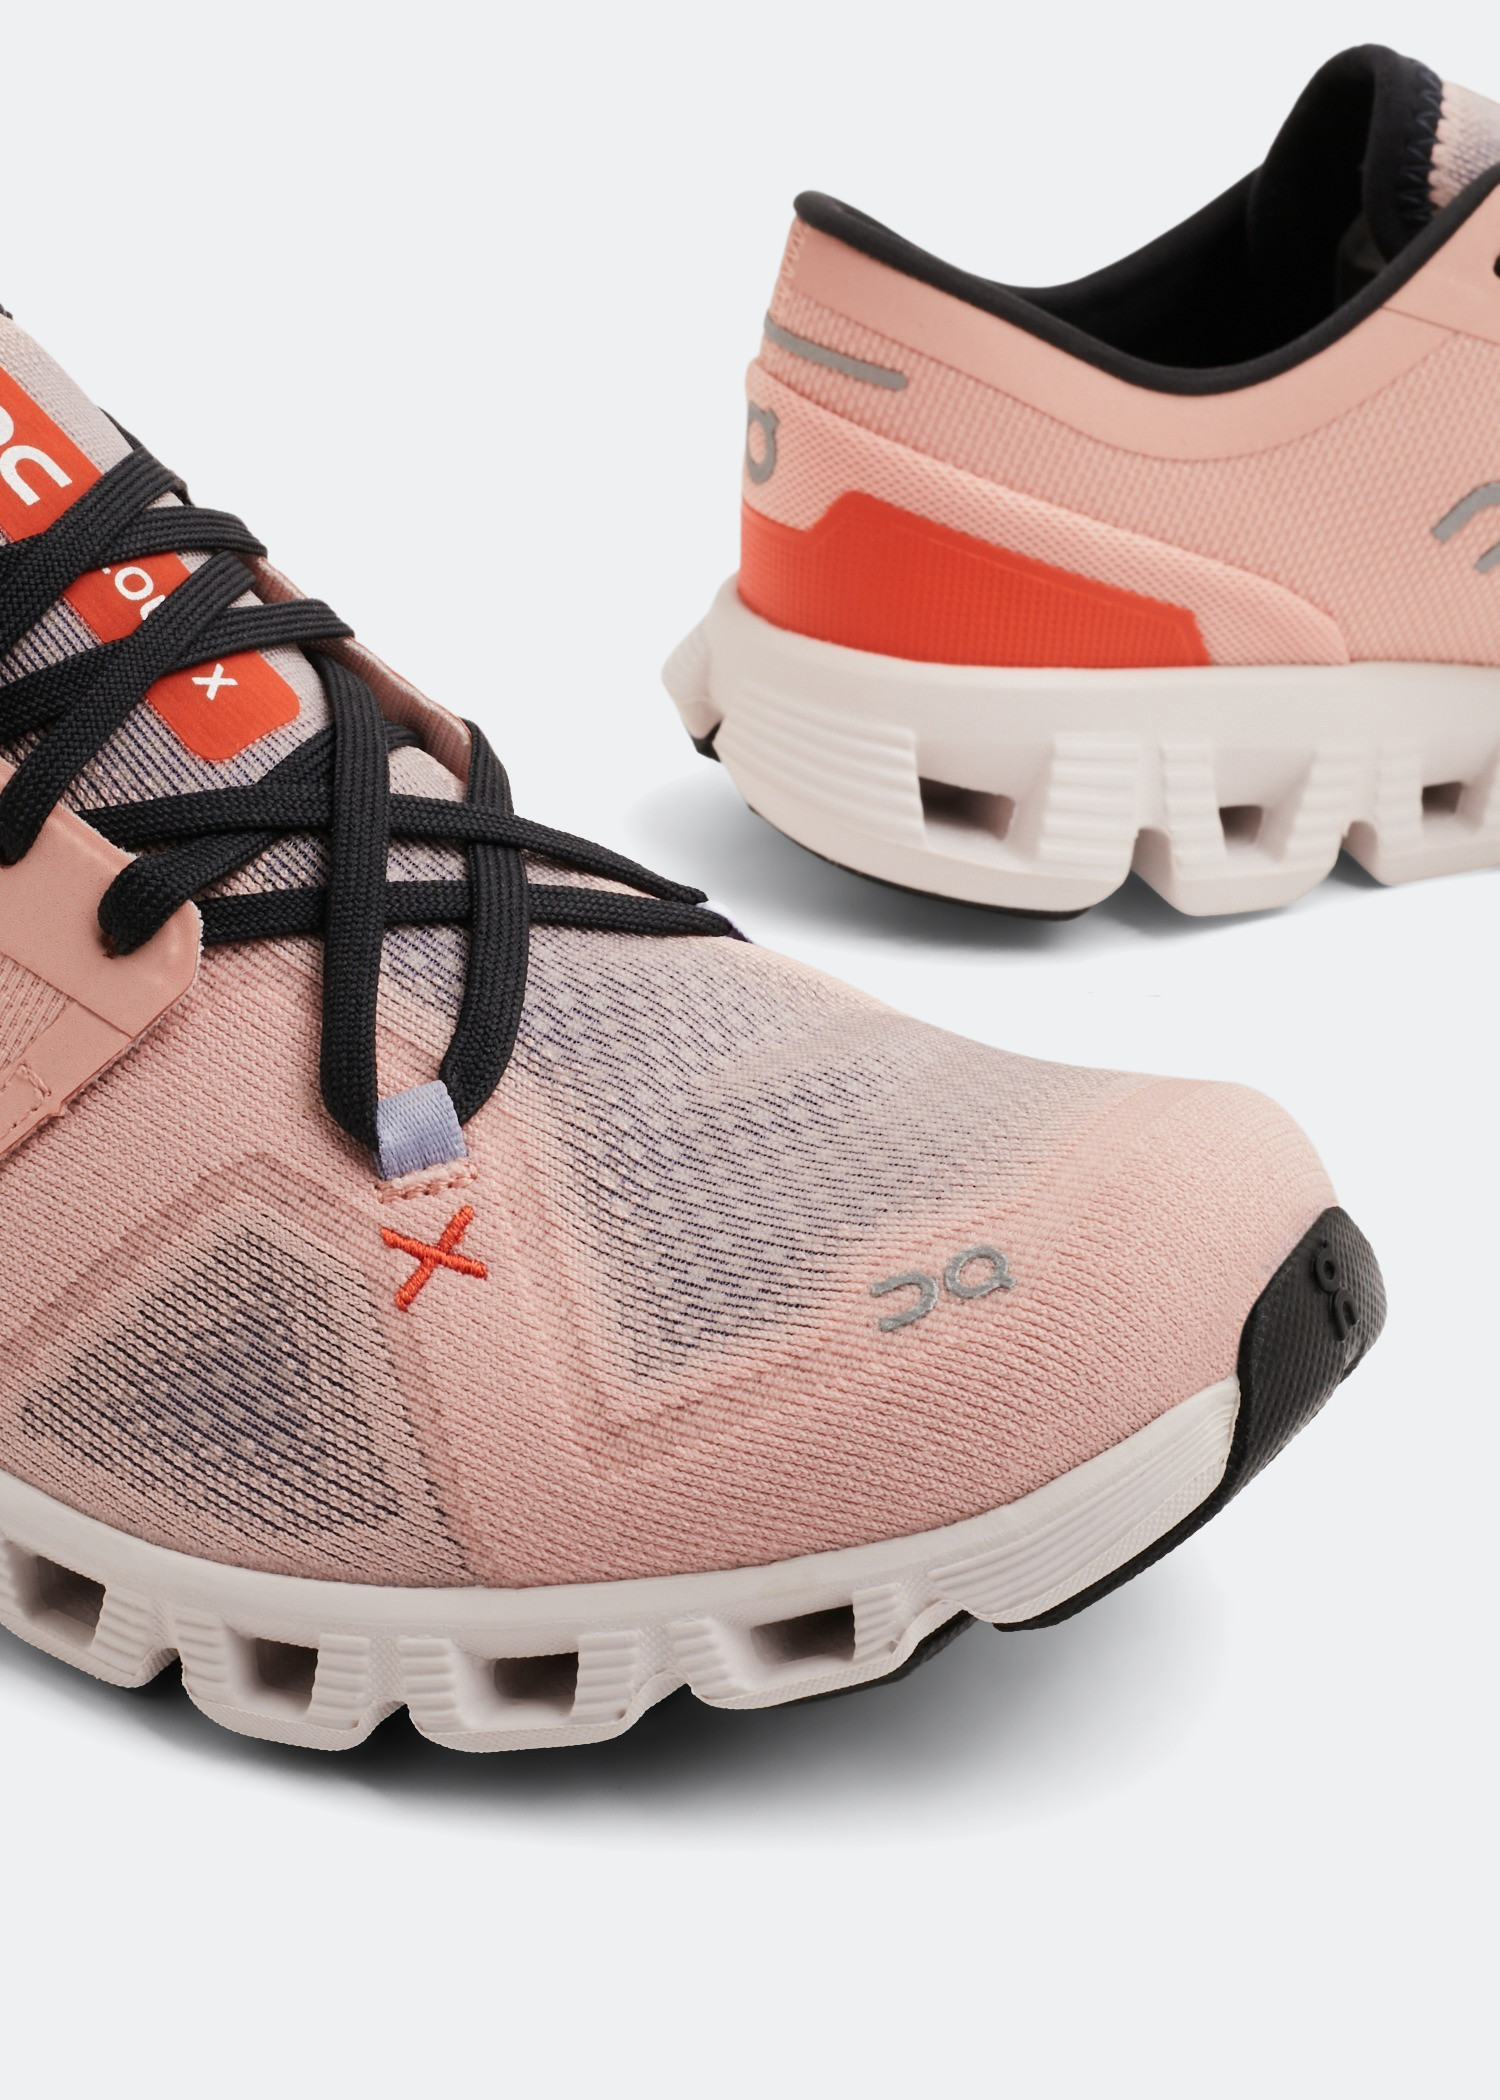 On Cloud X sneakers for Women - Pink in KSA | Level Shoes